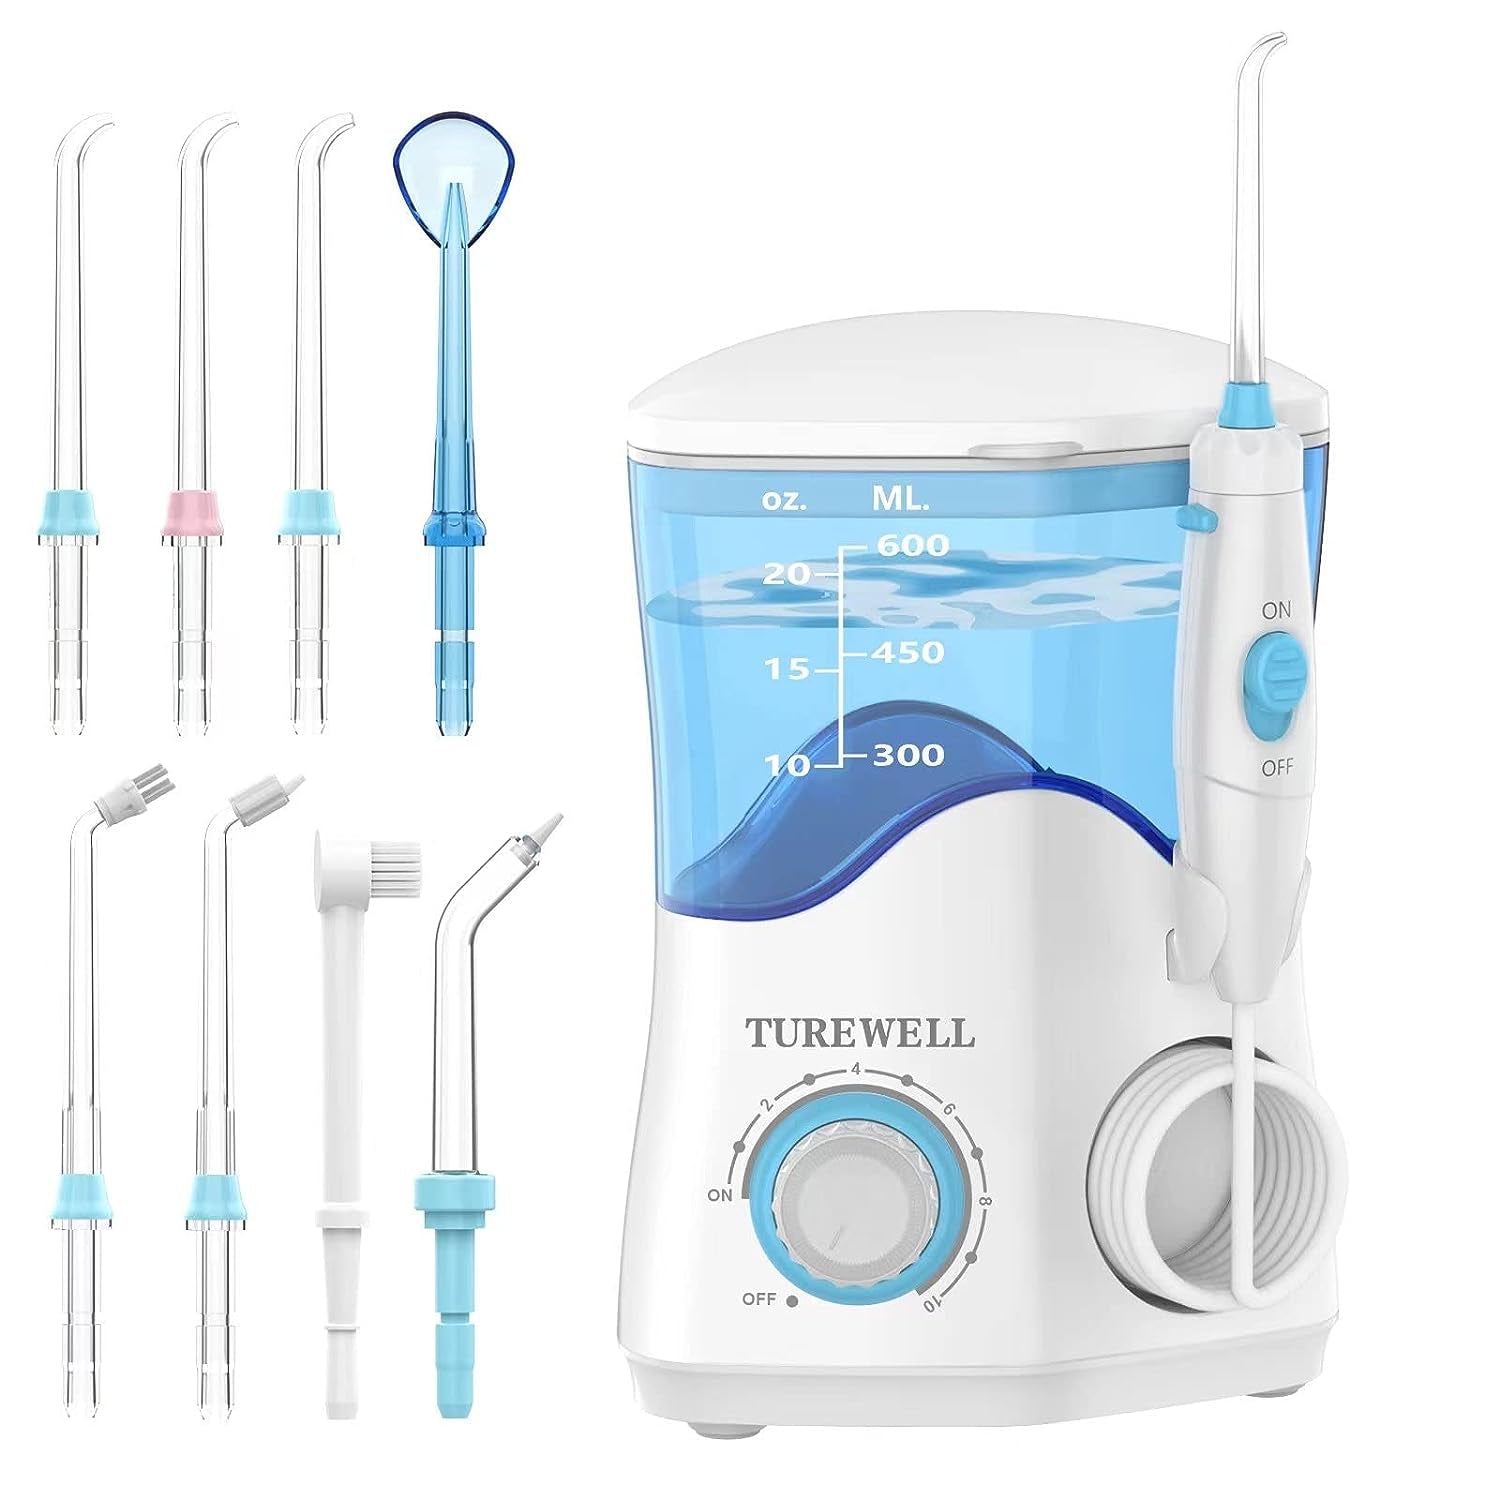 Water Dental Flosser for Teeth/Braces, Water Teeth Cleaner 8 Jet Tips and 10 Pressure Levels, 600ML Large Water Tank Oral Irrigator for Family(White)